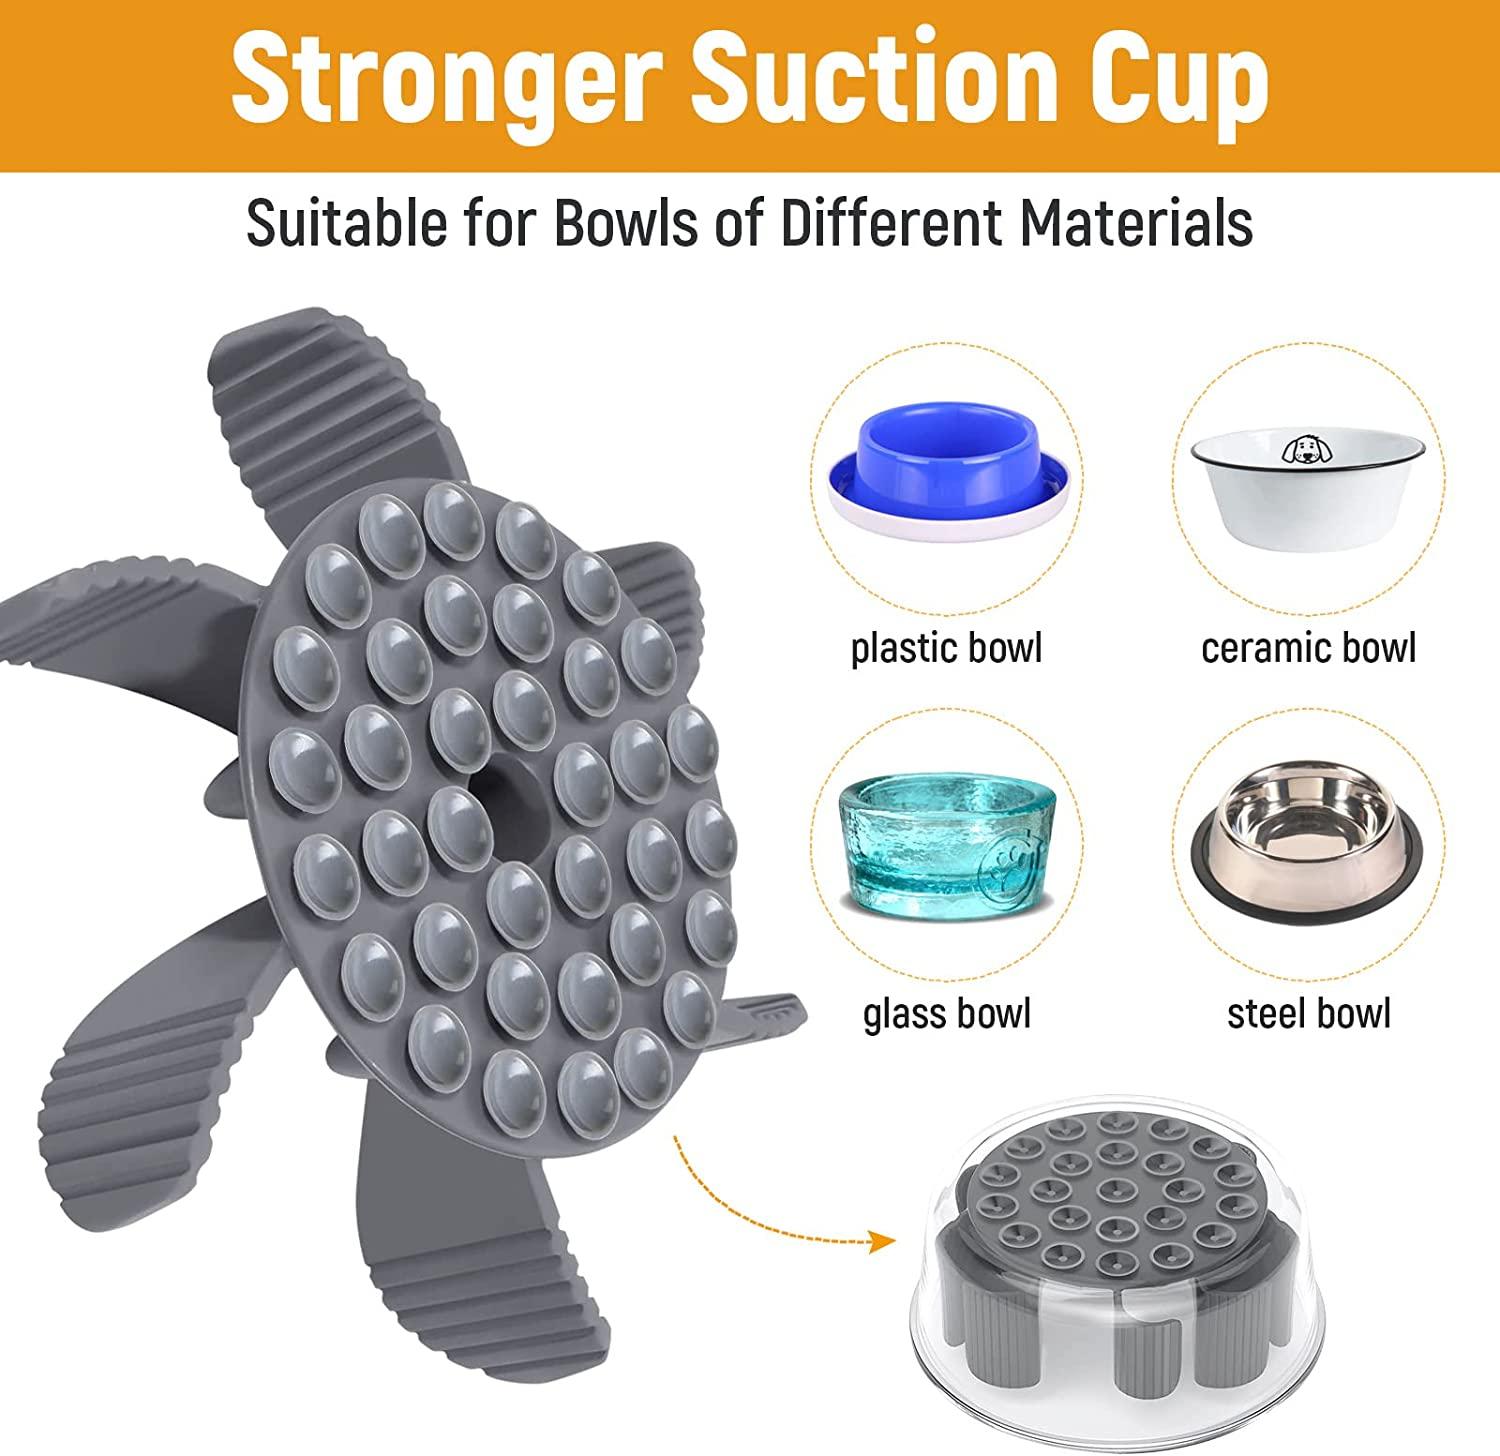 Suction Cup Pet Bowl 6.69 In